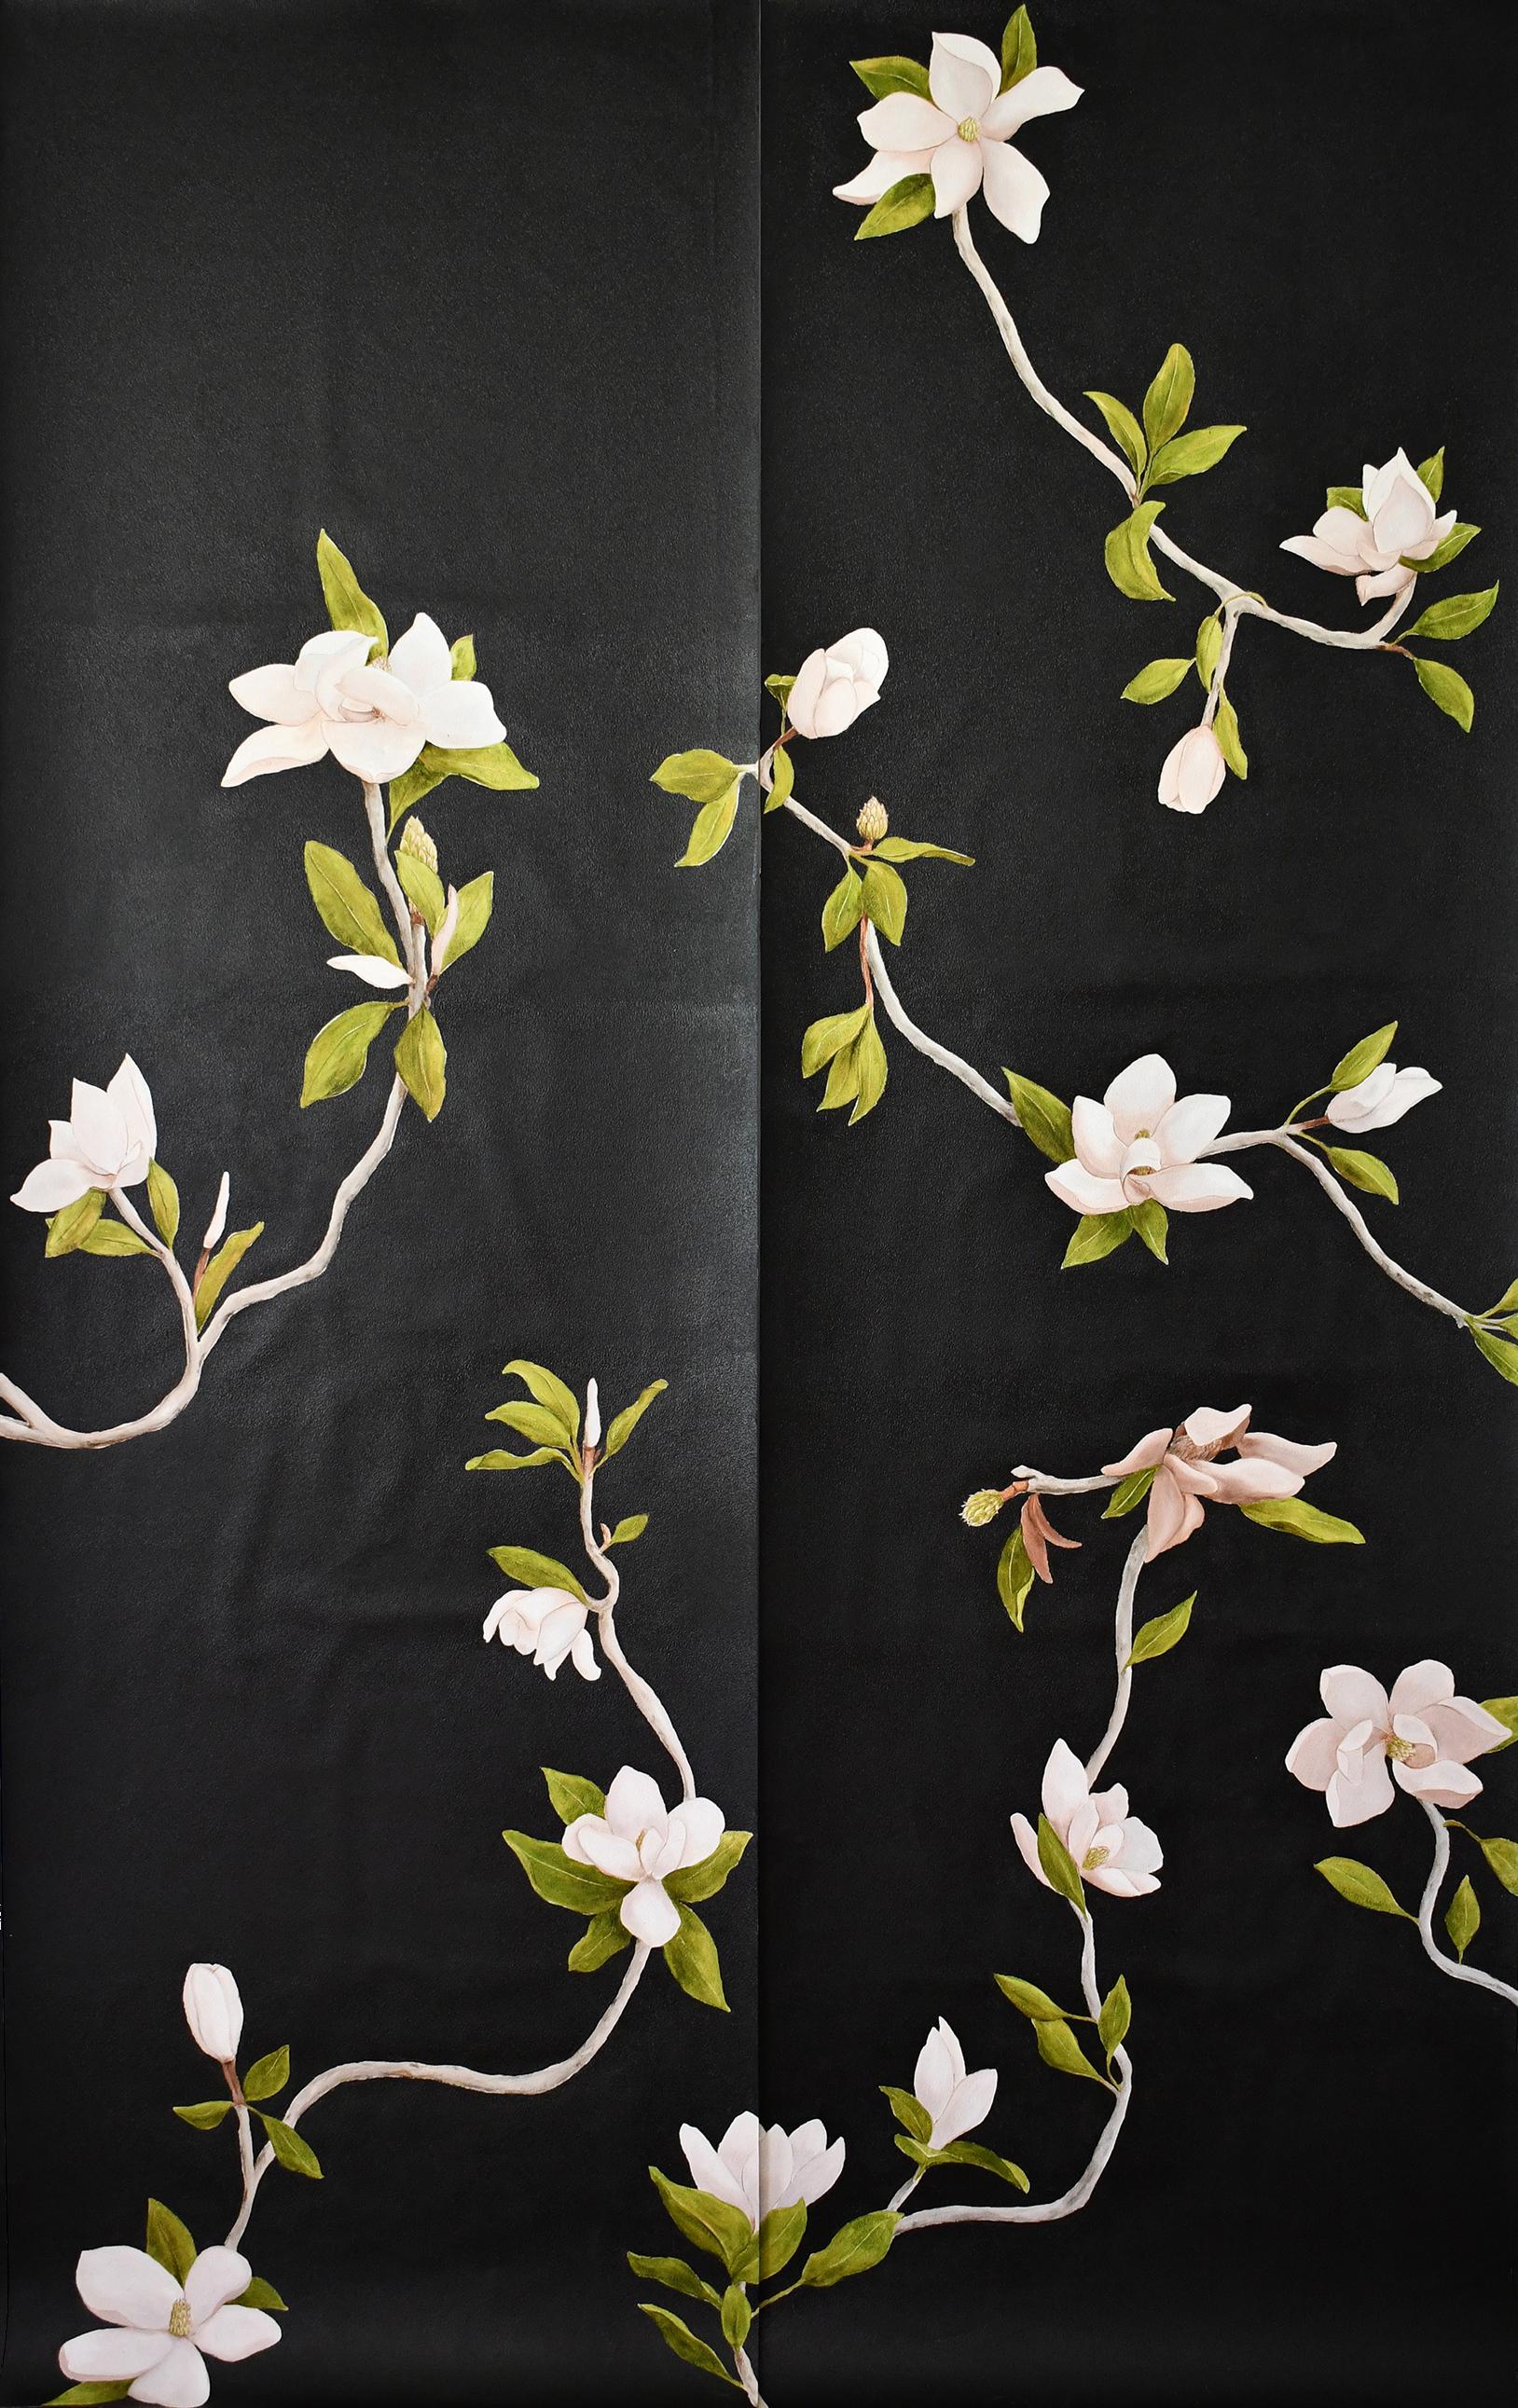 Black Magnolia hand painted wallpaper panels in traditional botanical style rather than a stylised chinoiserie. Black Magnolia hand painted wallpaper panels show two drops of 8 from the full botanical design.
Each wallpaper panel is a work of fine